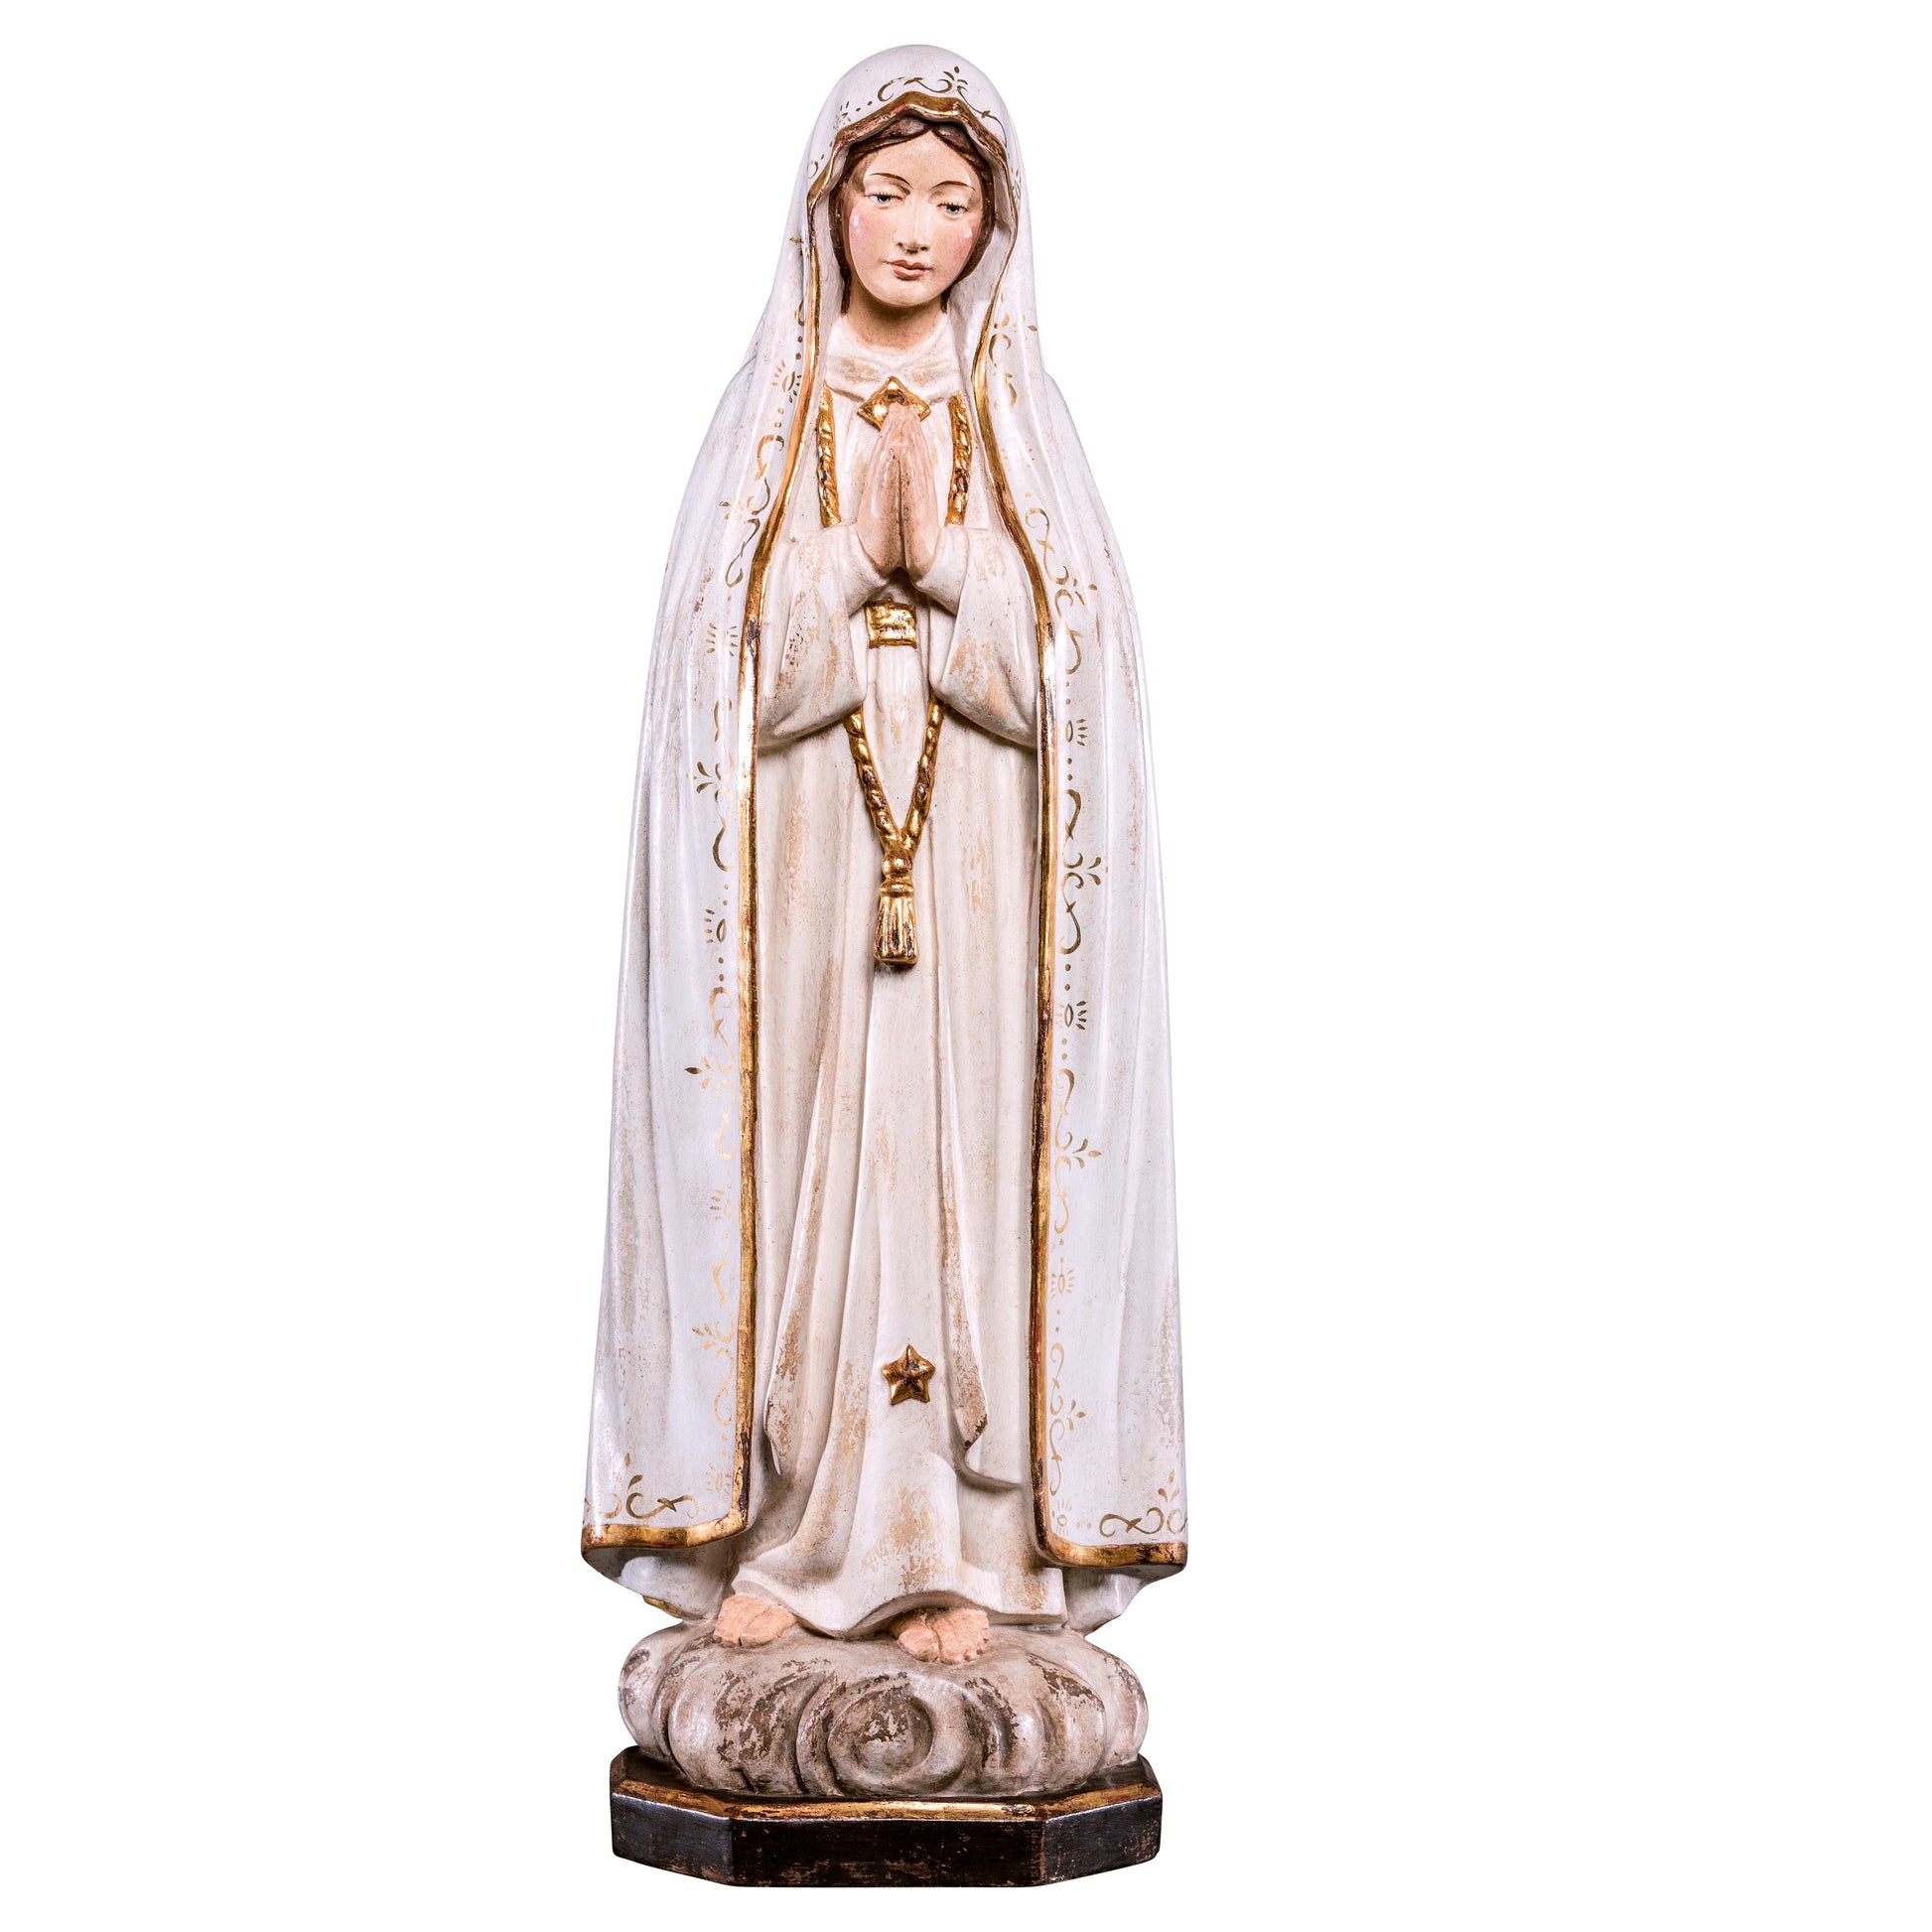 MONDO CATTOLICO Golden / 40 cm (15.7 in) Wooden statue of Our Lady of Fátima